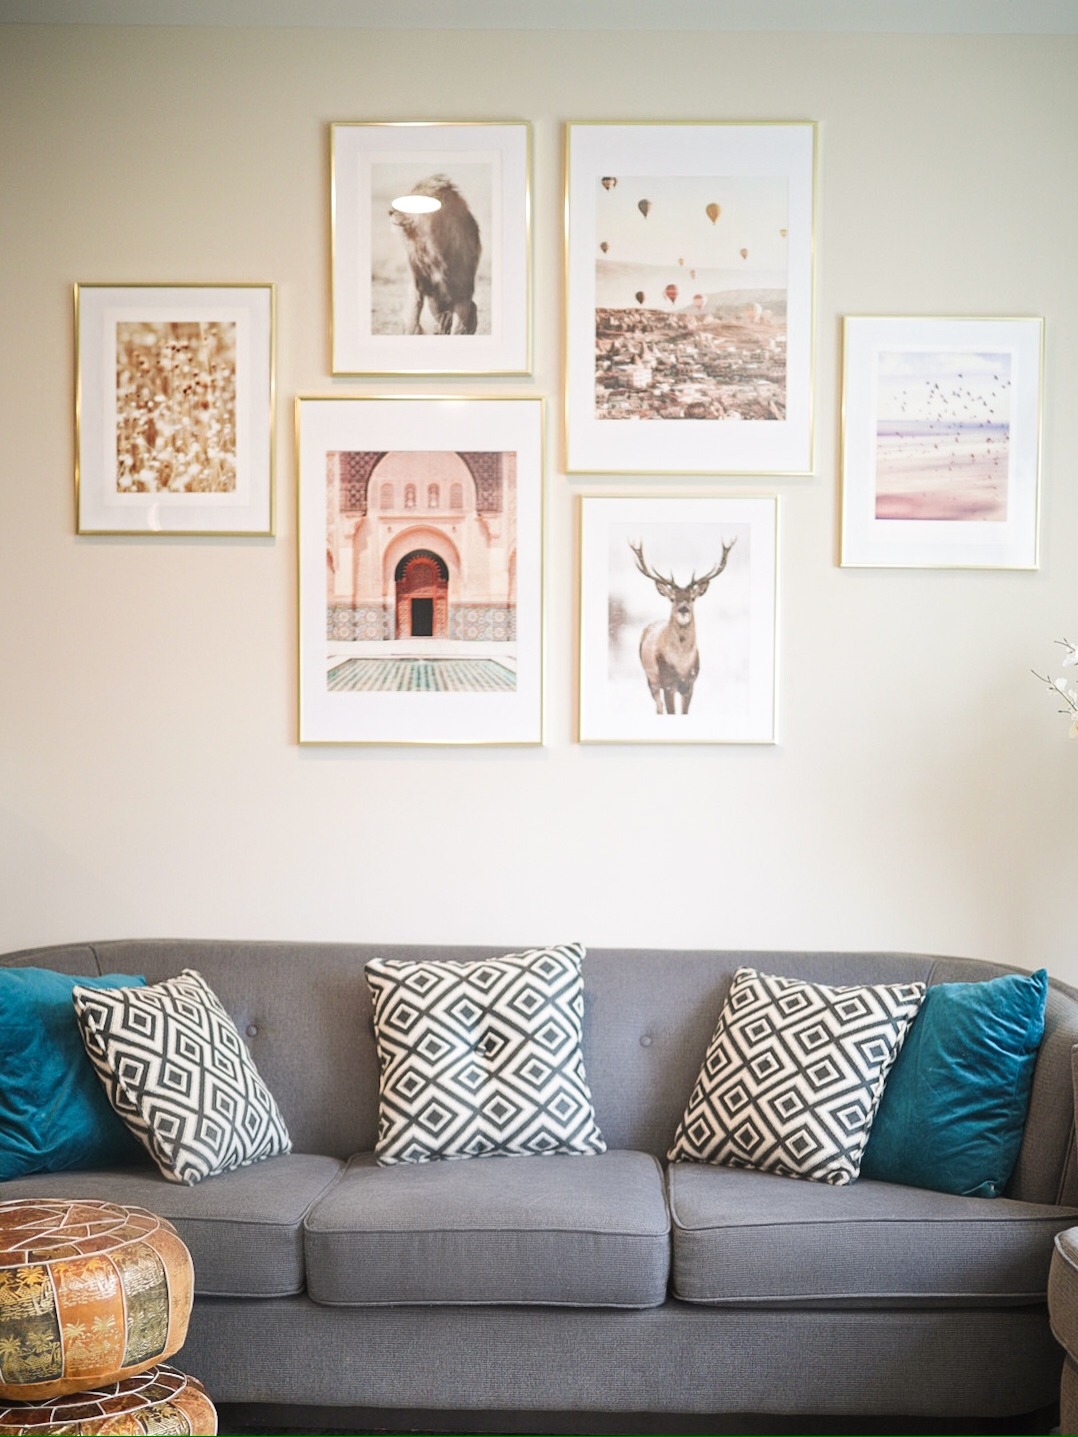 How to Make a Gallery Wall for Beginners poster store posters prints ideas inspo faiza inam 6